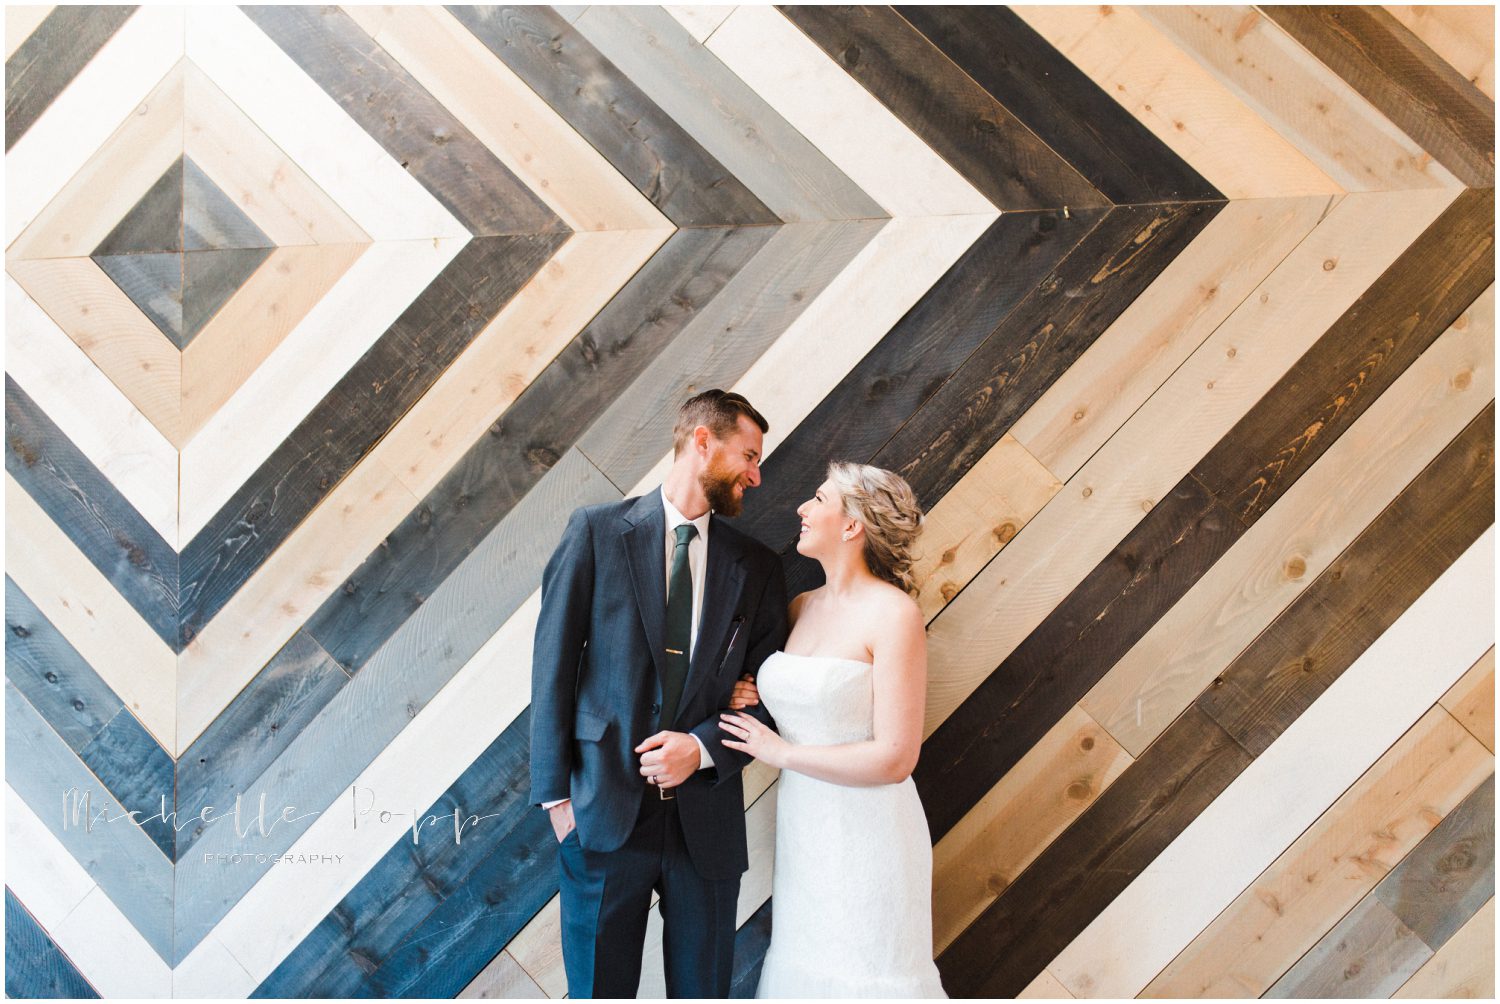 creative backdrop for intimate wedding